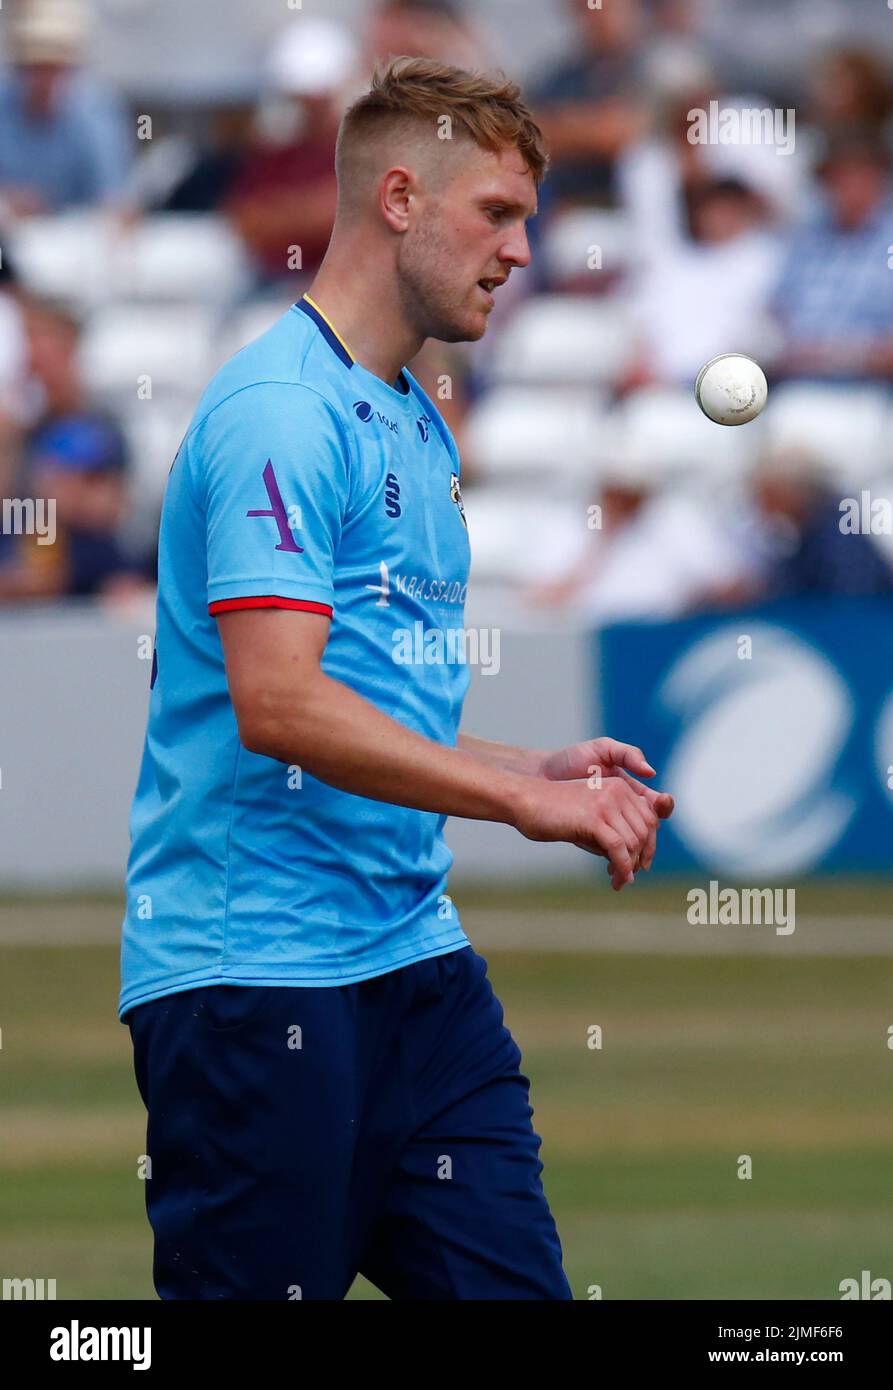 CHELMSFORD ENGLAND - AUGUST  05 : Essex's Jamie Porter during Royal London One-Day Cup match between Essex Eagles CCC against Derbyshire CCC at The Cl Stock Photo